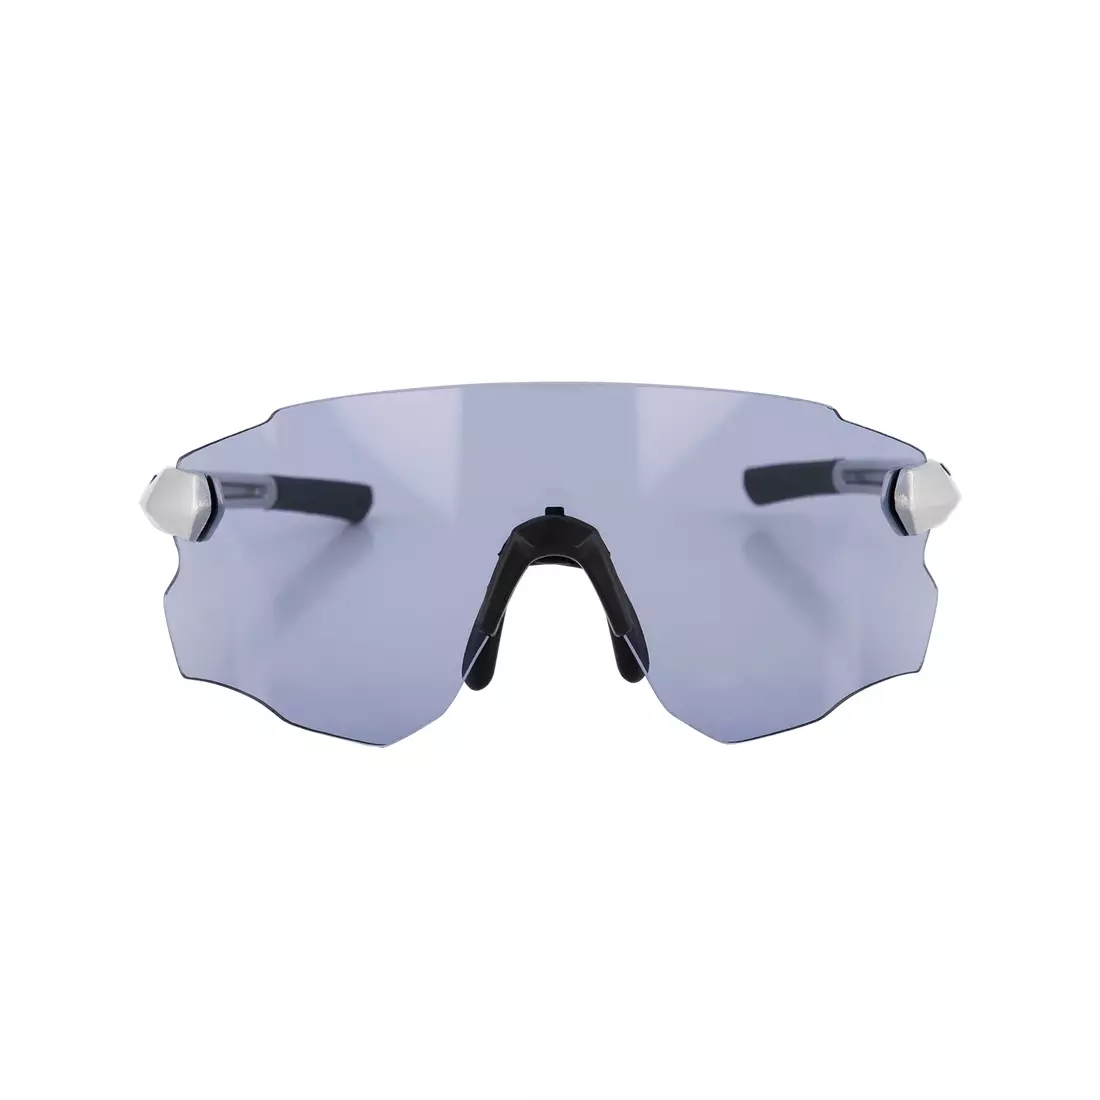 ROGELLI sports glasses with replaceable lenses VISTA grey